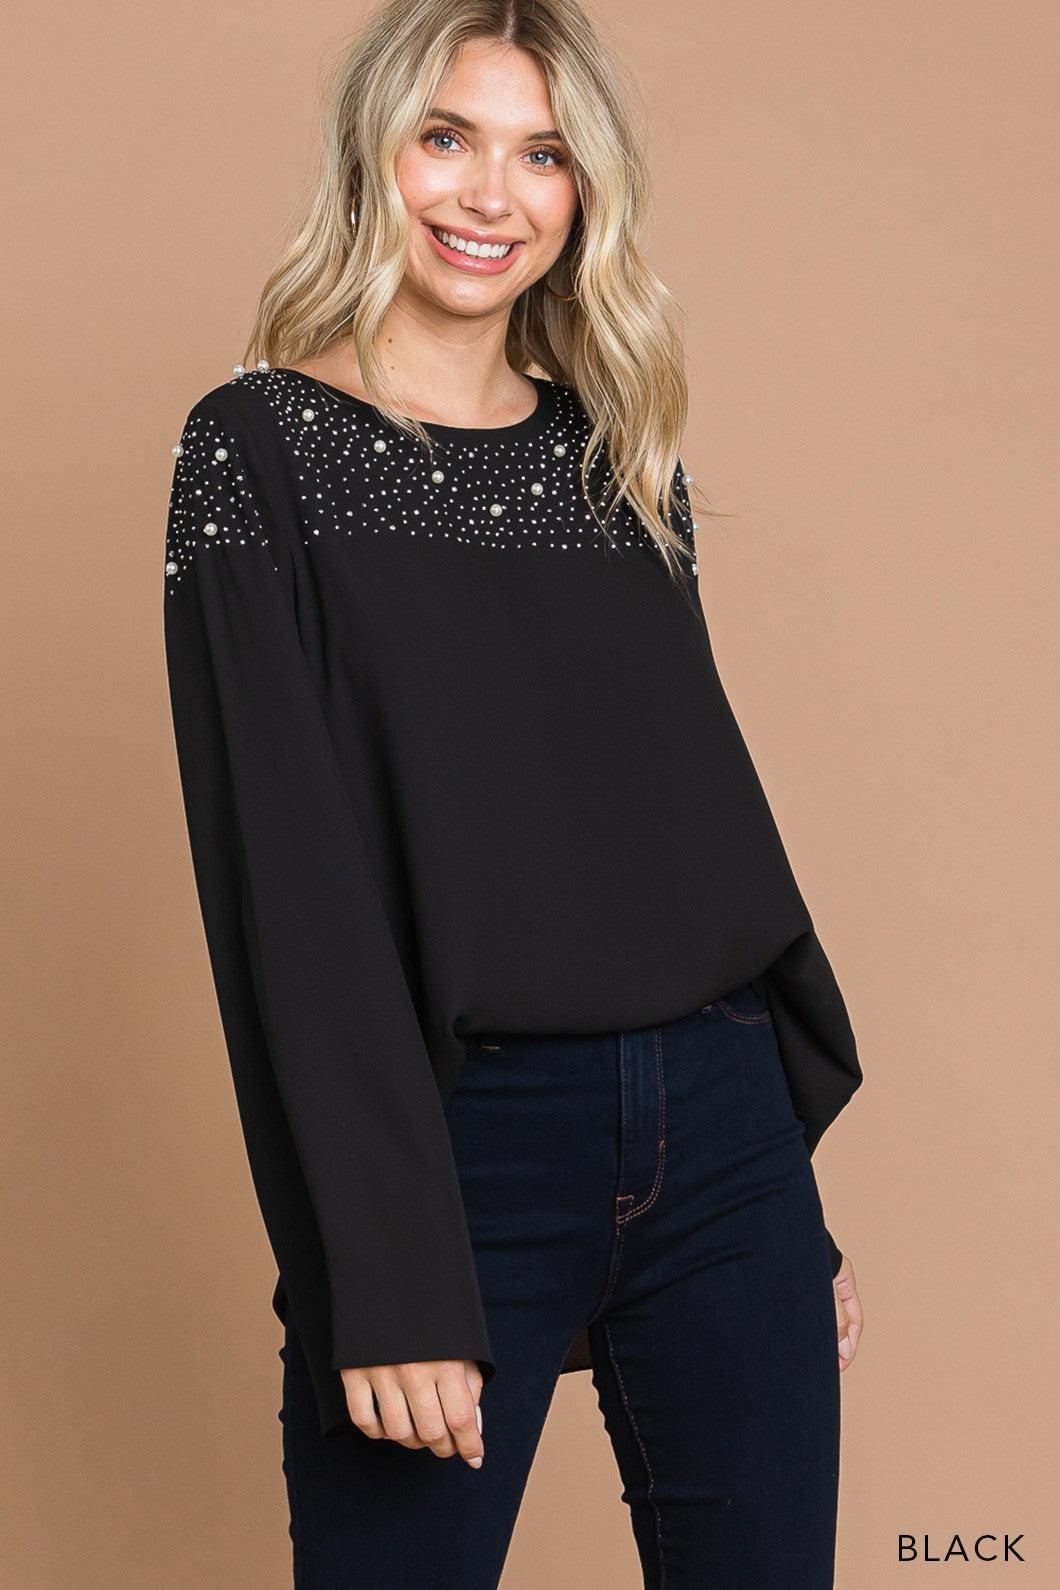 PLUS chiffon rhinestone/pearl bell sleeve top - RK Collections Boutique